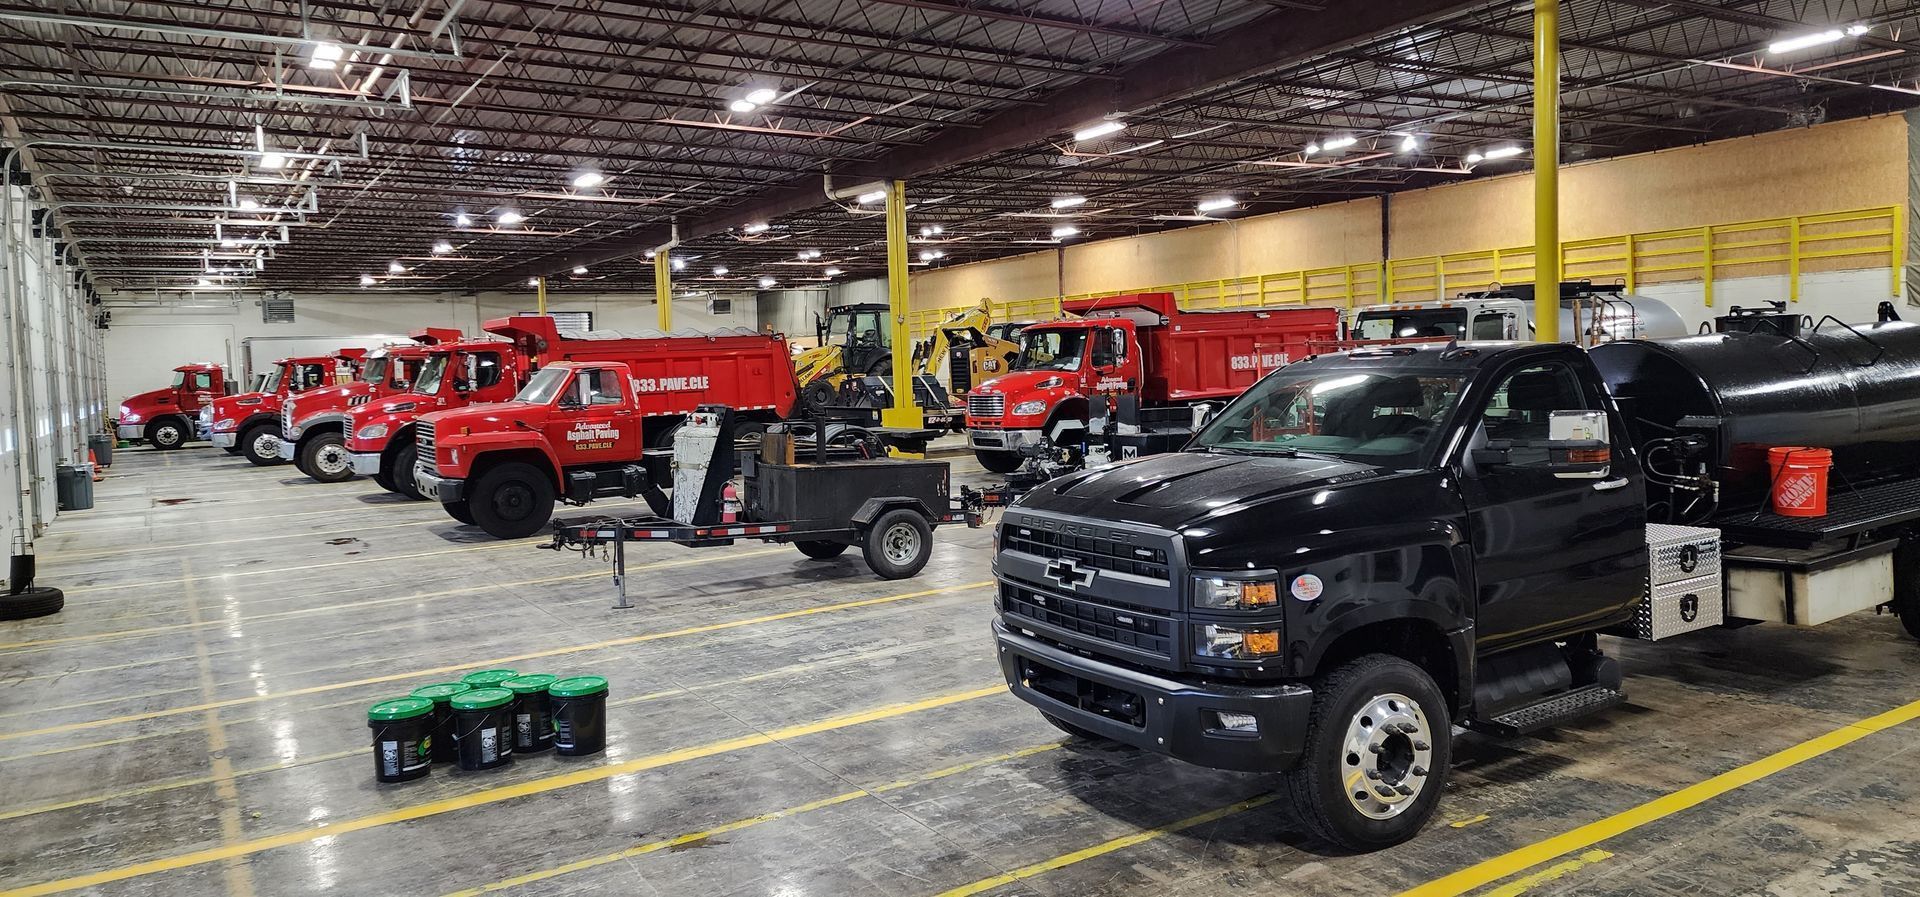 A row of trucks are parked in a large warehouse.